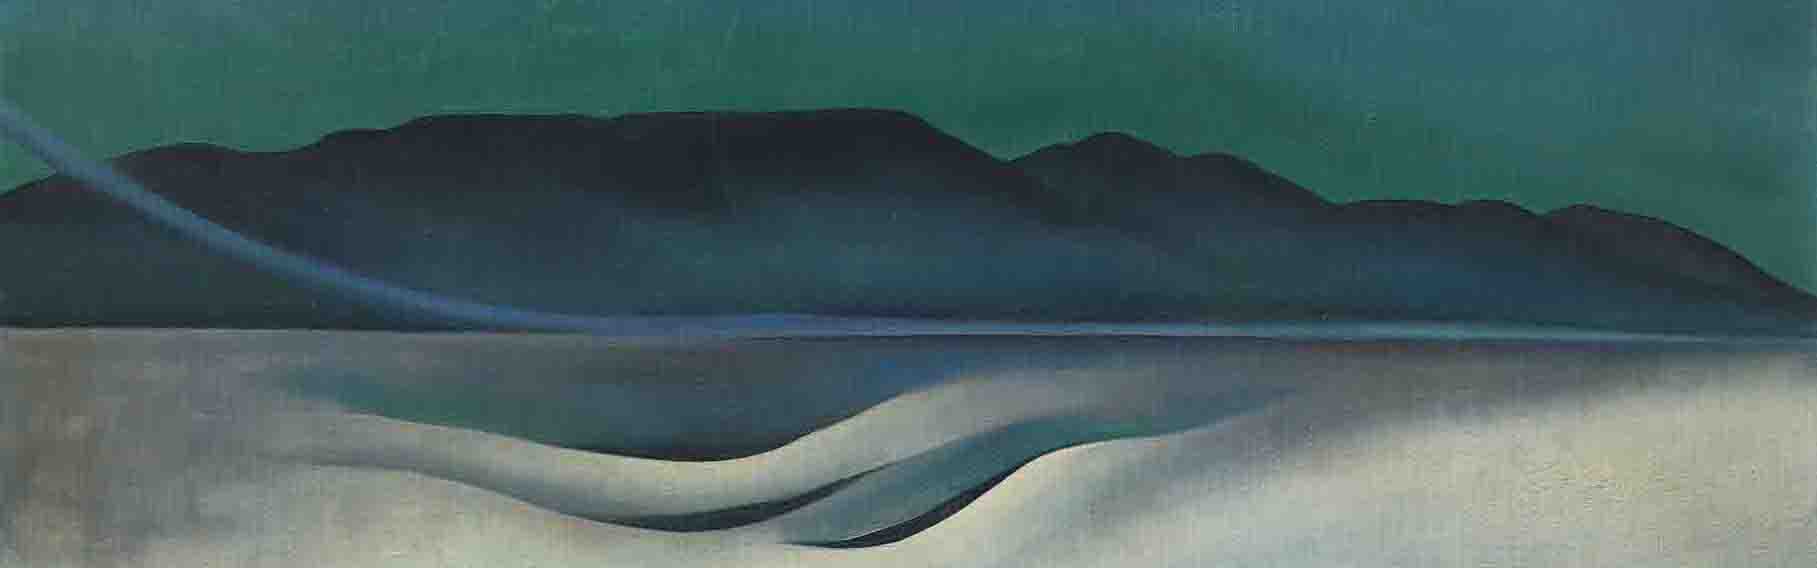 Georgia O’Keeffe (American, 1887–1986), Lake George, 1924, oil on canvas, 18-1/8 x 35-1/8 inches. Bequest of James R. and Barbara R. Palmer, 2019.97. © 2021 Georgia O'Keeffe Museum / Artists Rights Society (ARS), New York